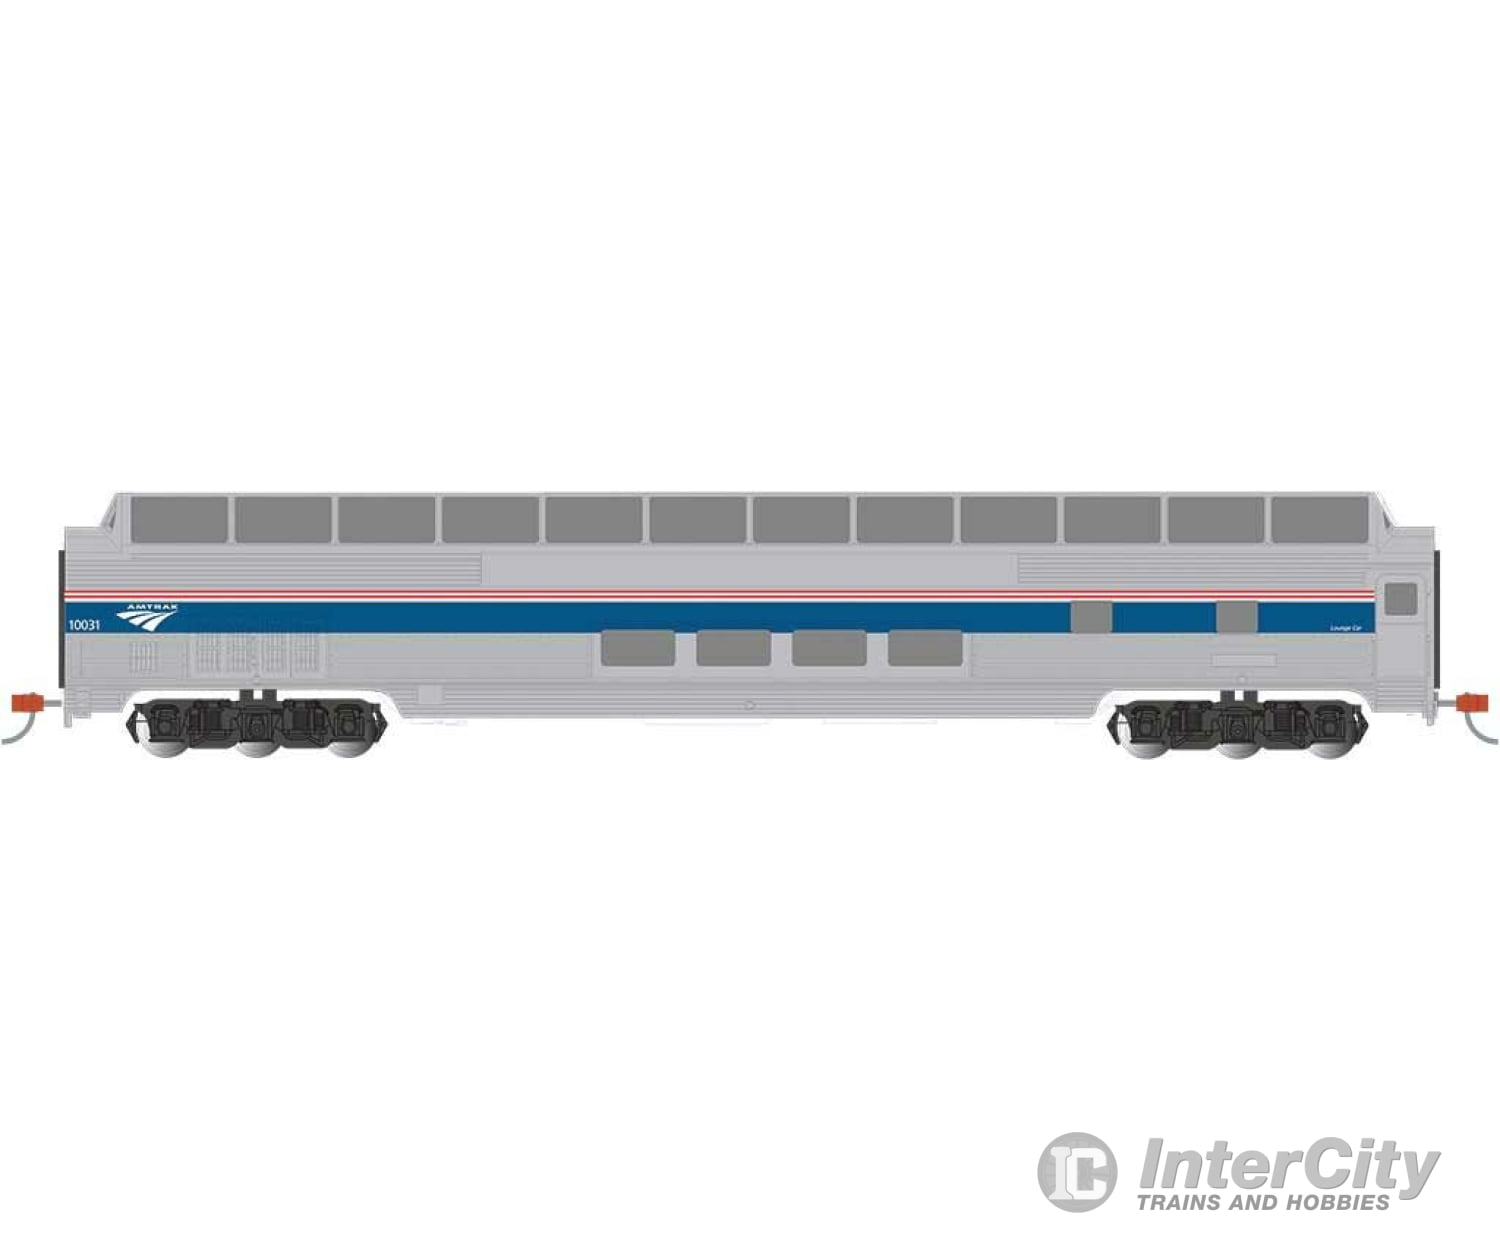 Bachmann 13001 Budd 85 Full-Length Dome With Lights - Ready To Run Silver Series(R) -- Amtrak (Phase